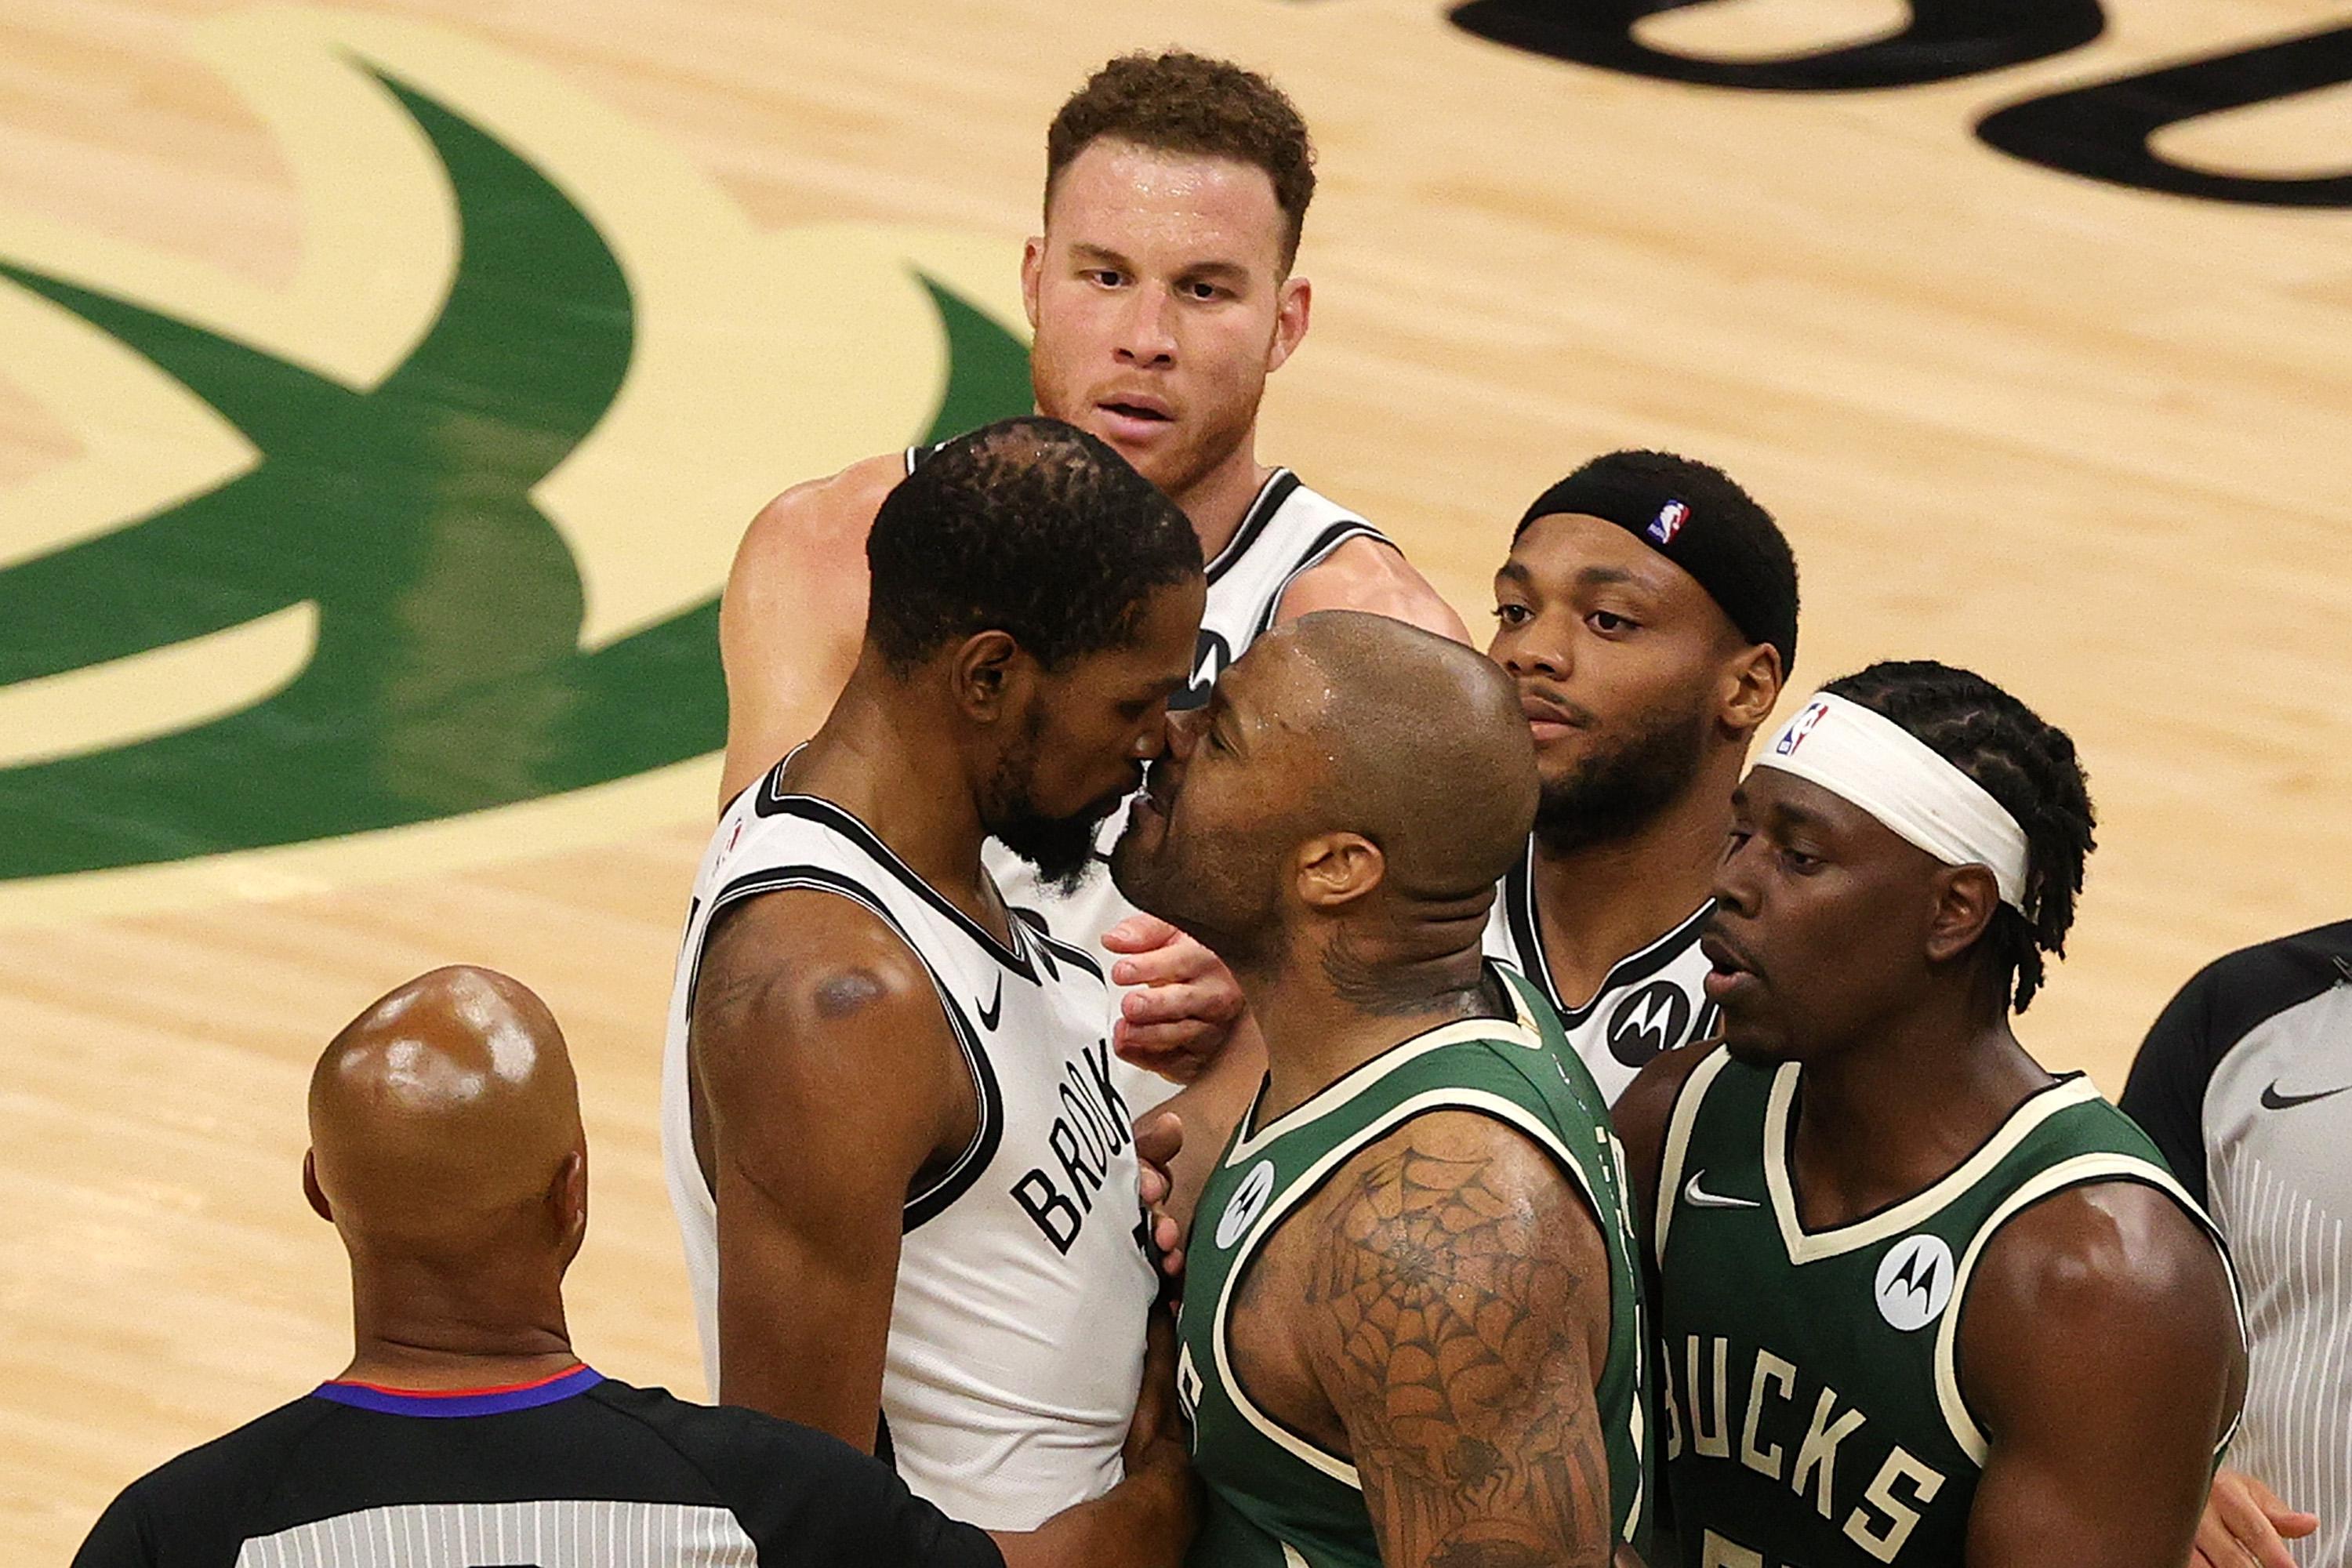 Kevin Durant (L) and P.J. Tucker (R) stand nose-to-nose, while Brooklyn Nets and Milwaukee Bucks players, as well as two referees, gather around them.